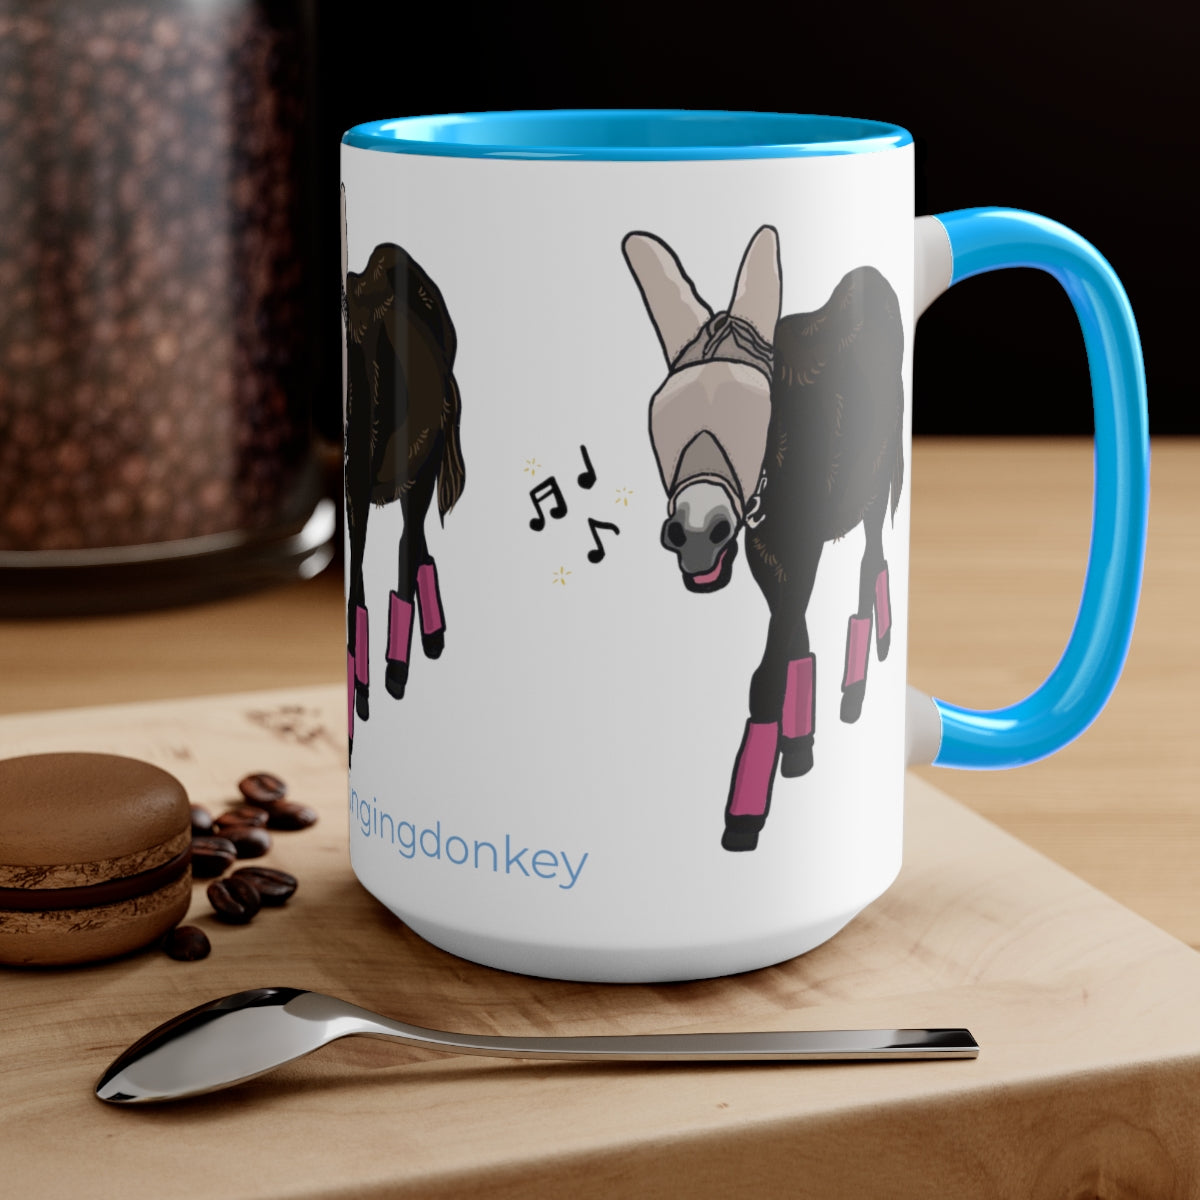 Mornings with Monte the Singing Donkey Fly Gear Two-Tone Mugs, 15oz